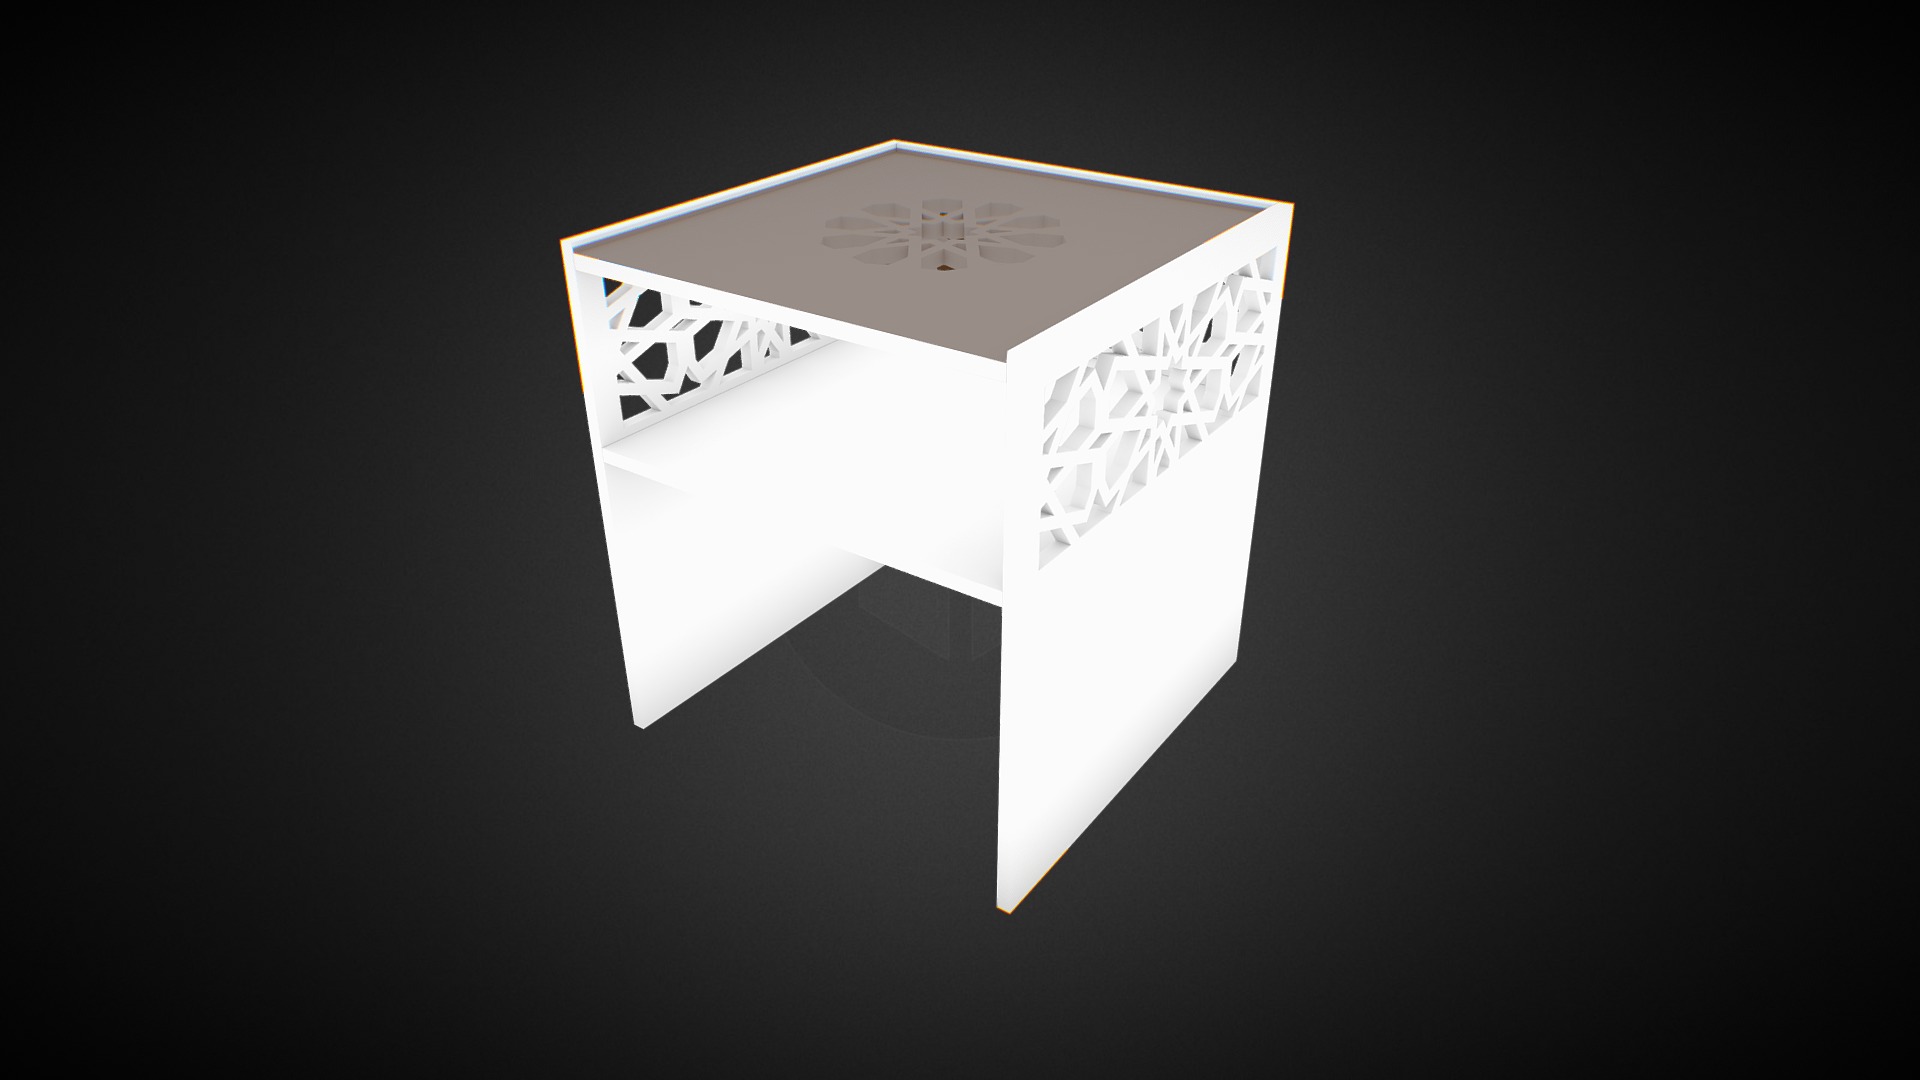 3D model Arabesque side table - This is a 3D model of the Arabesque side table. The 3D model is about a white box with a black background.